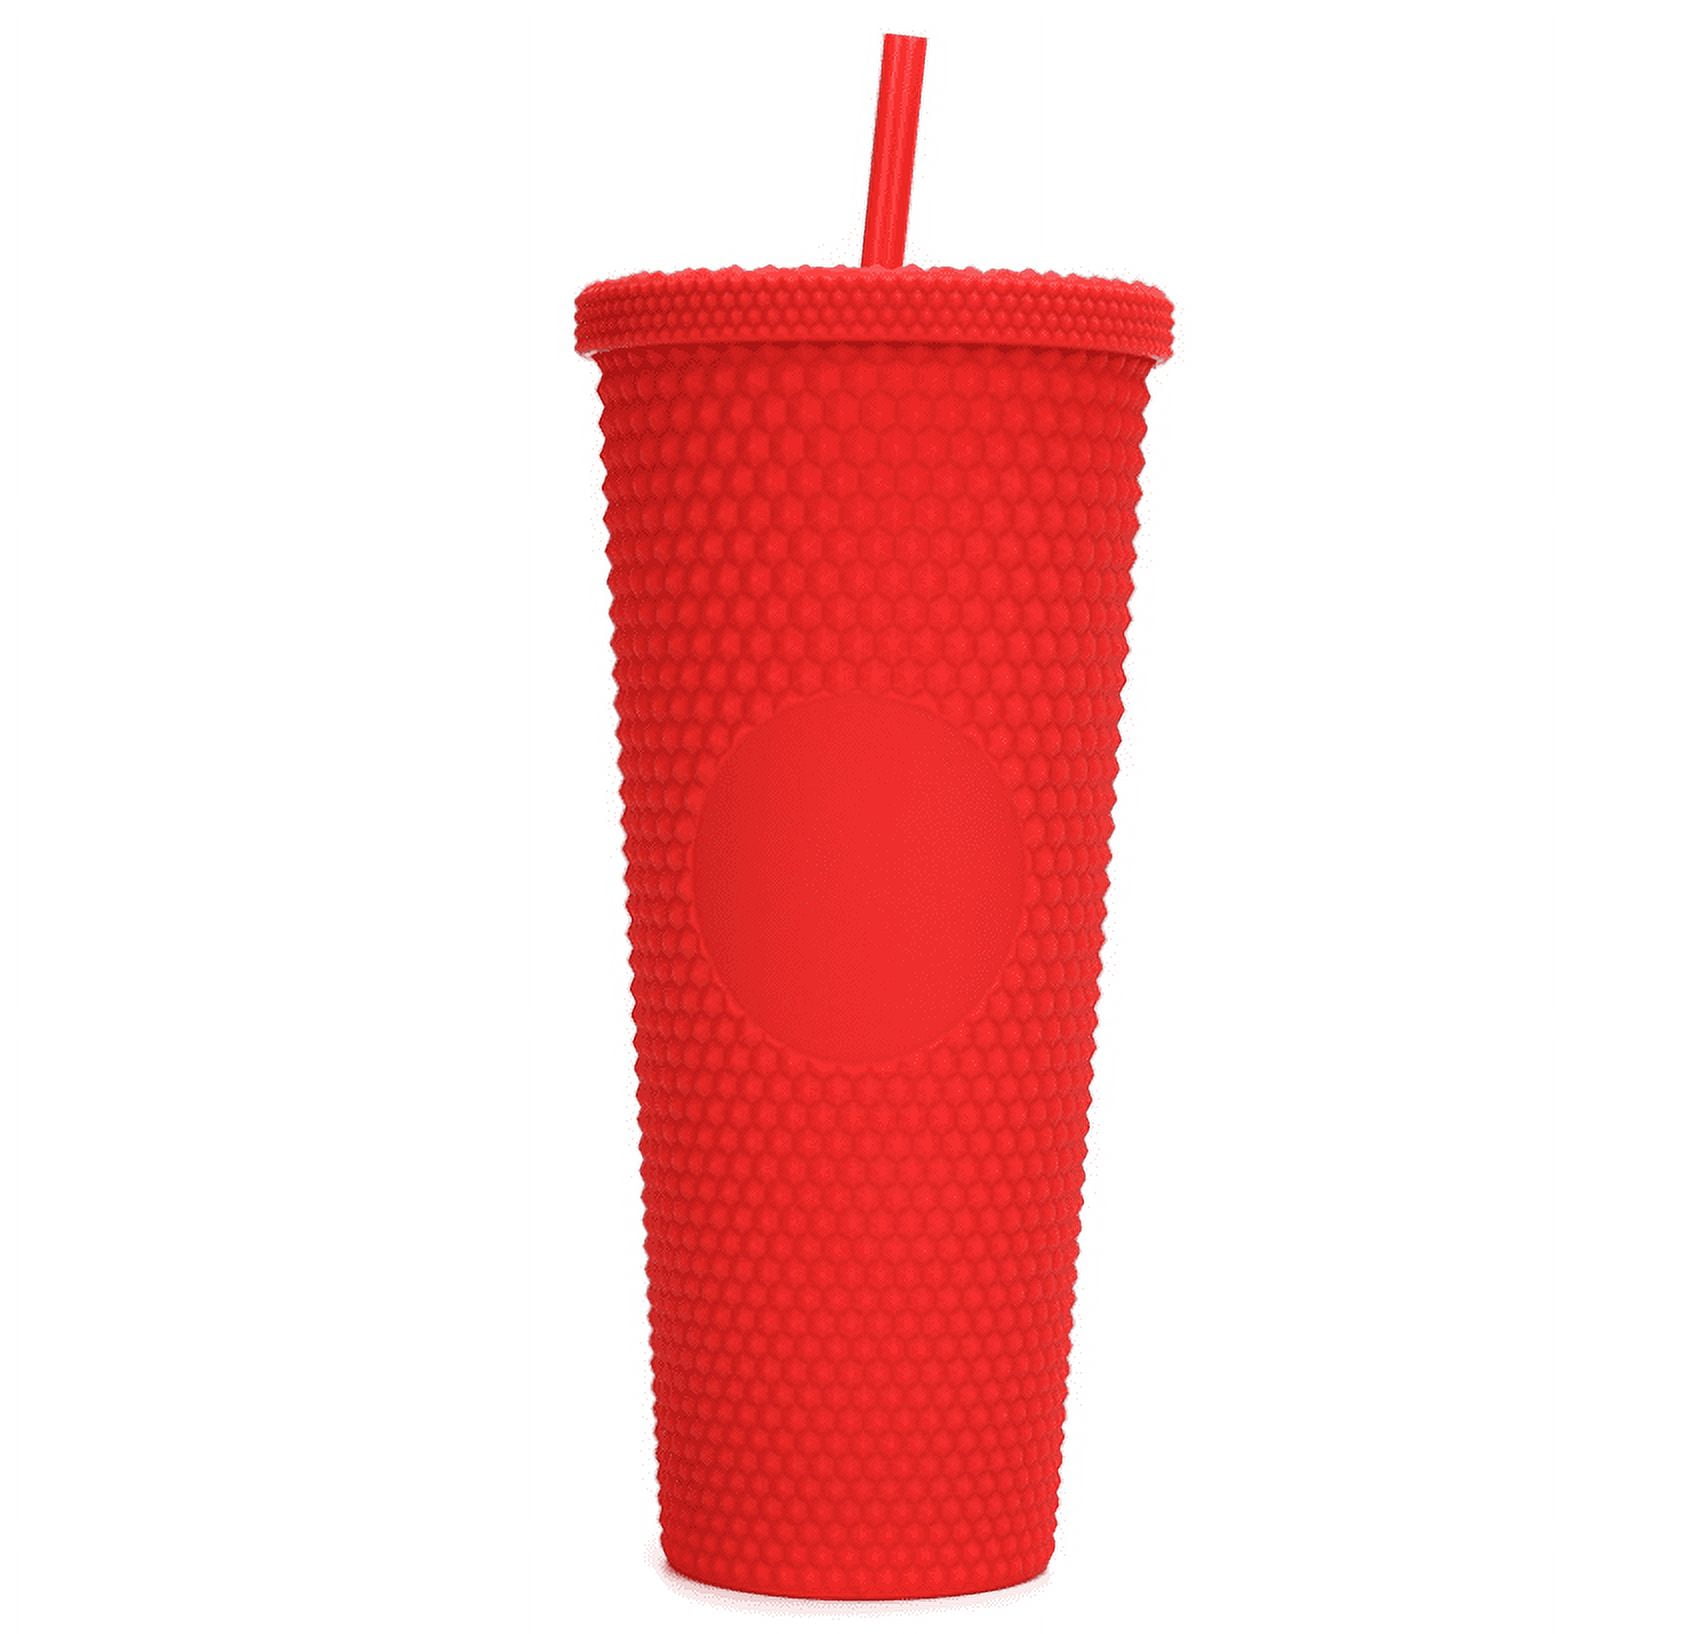 ATM 22oz Silicone Straw Tumbler - The Warehouse at C.C. Creations